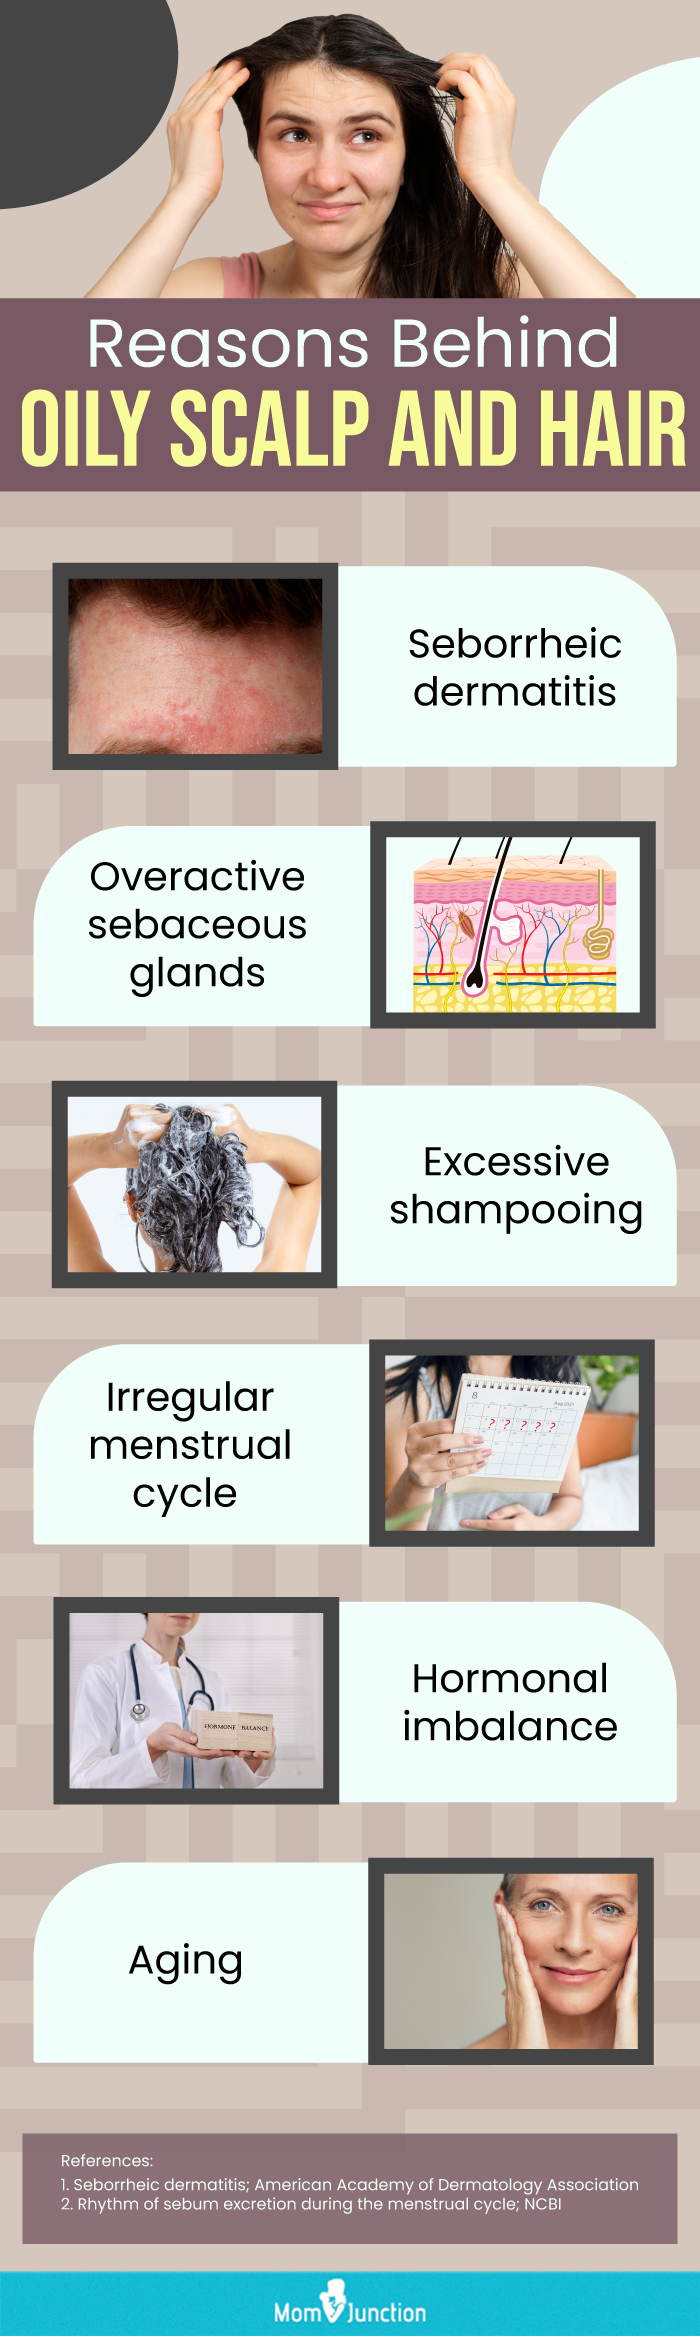 Reasons Behind Oily Scalp And Hair (Infographic)